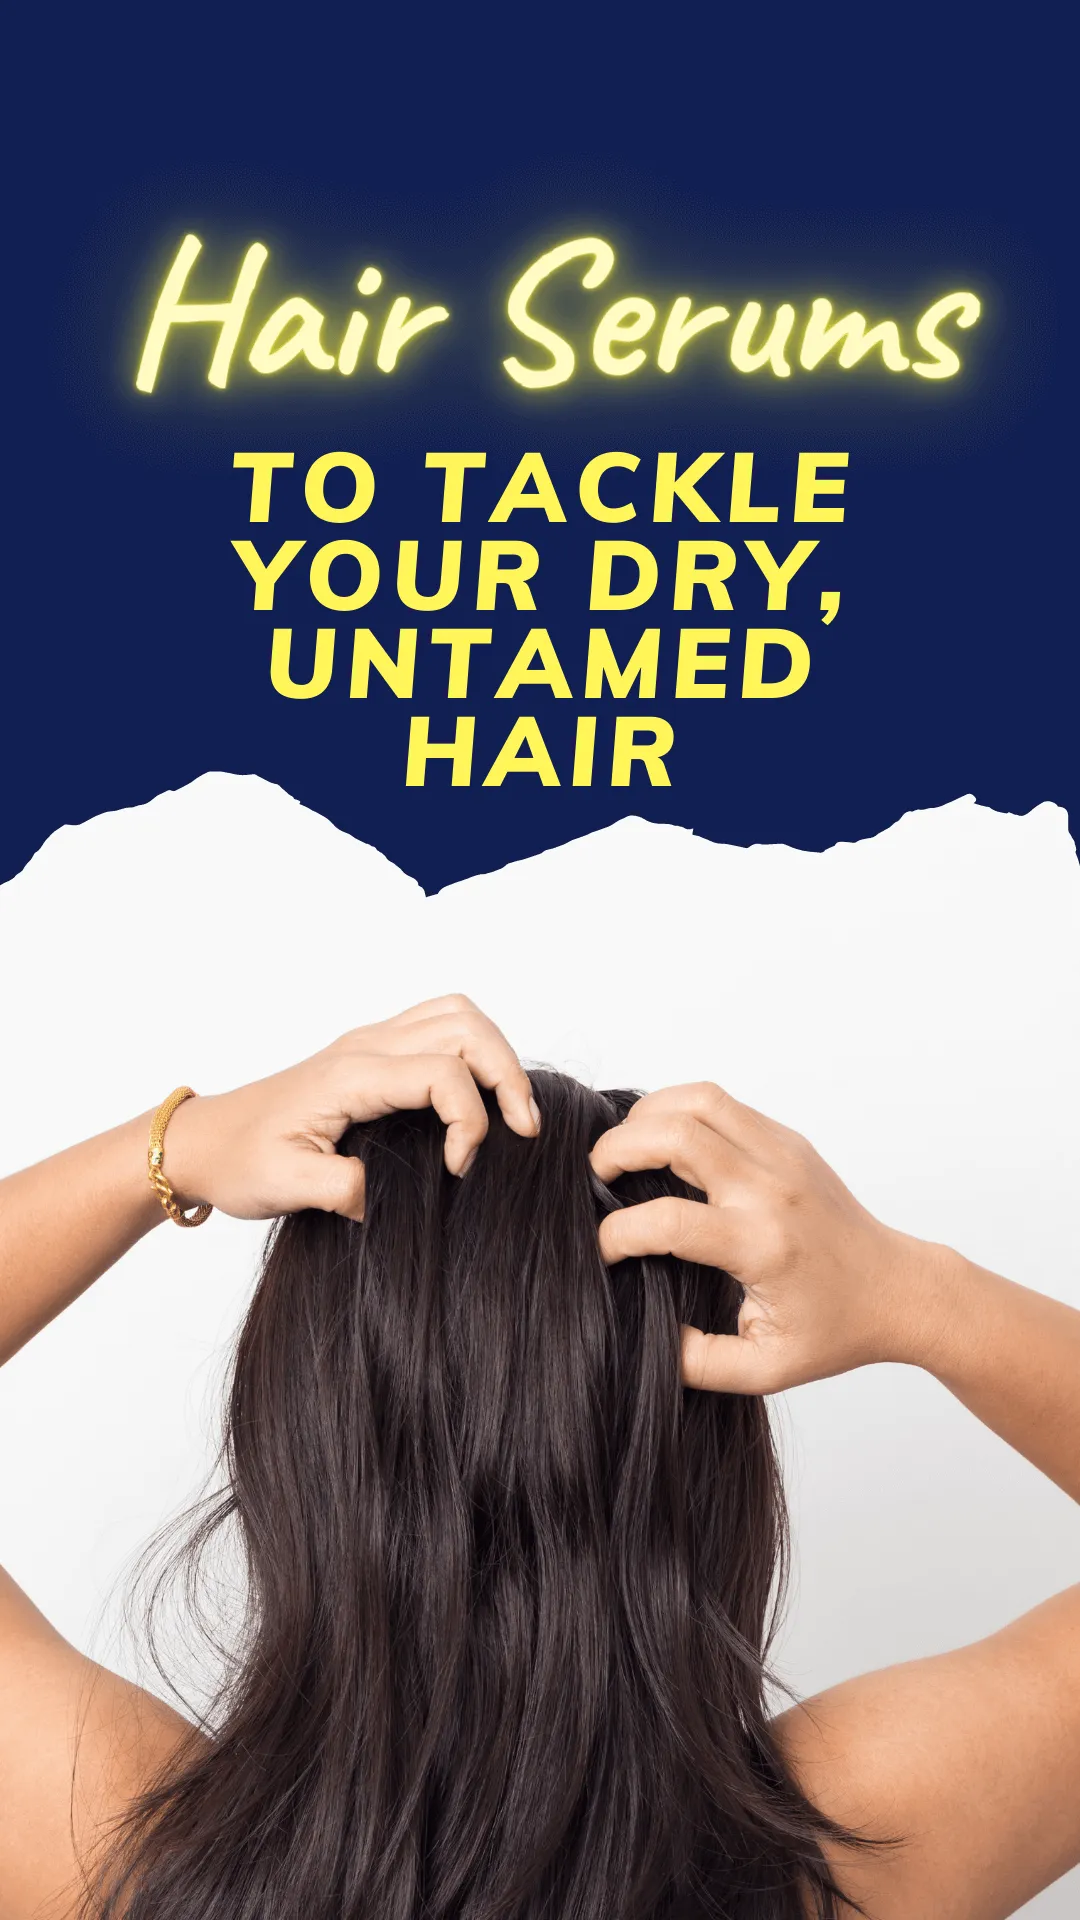 Hair Serums to tackle your dry, untamed hair